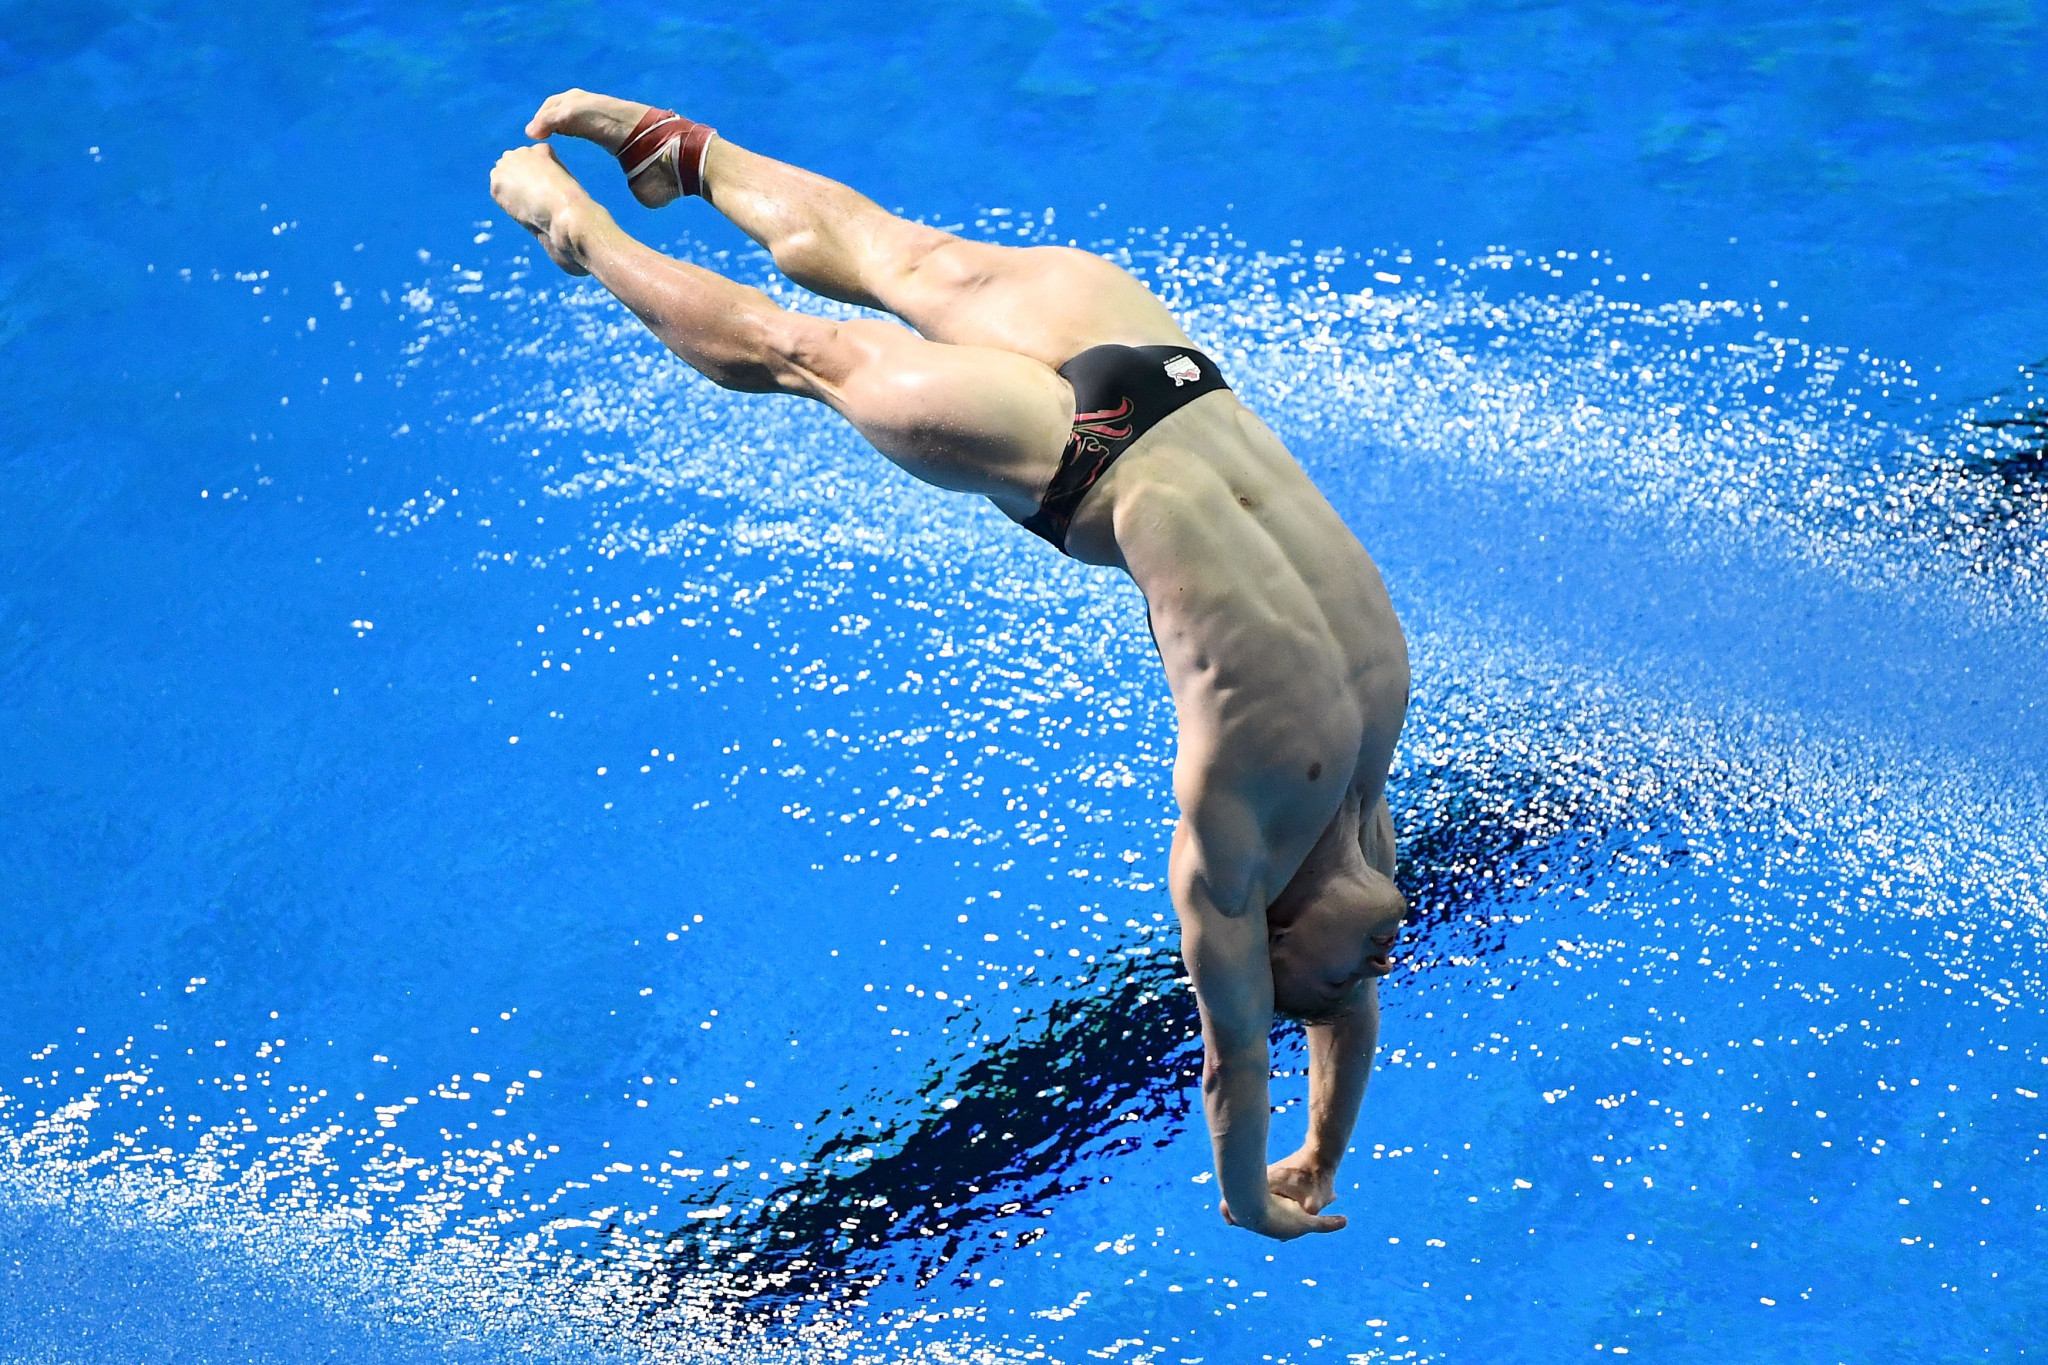 England's Jack Laugher lived up to his billing by taking gold in the men's one metre springboard event ©Getty Images